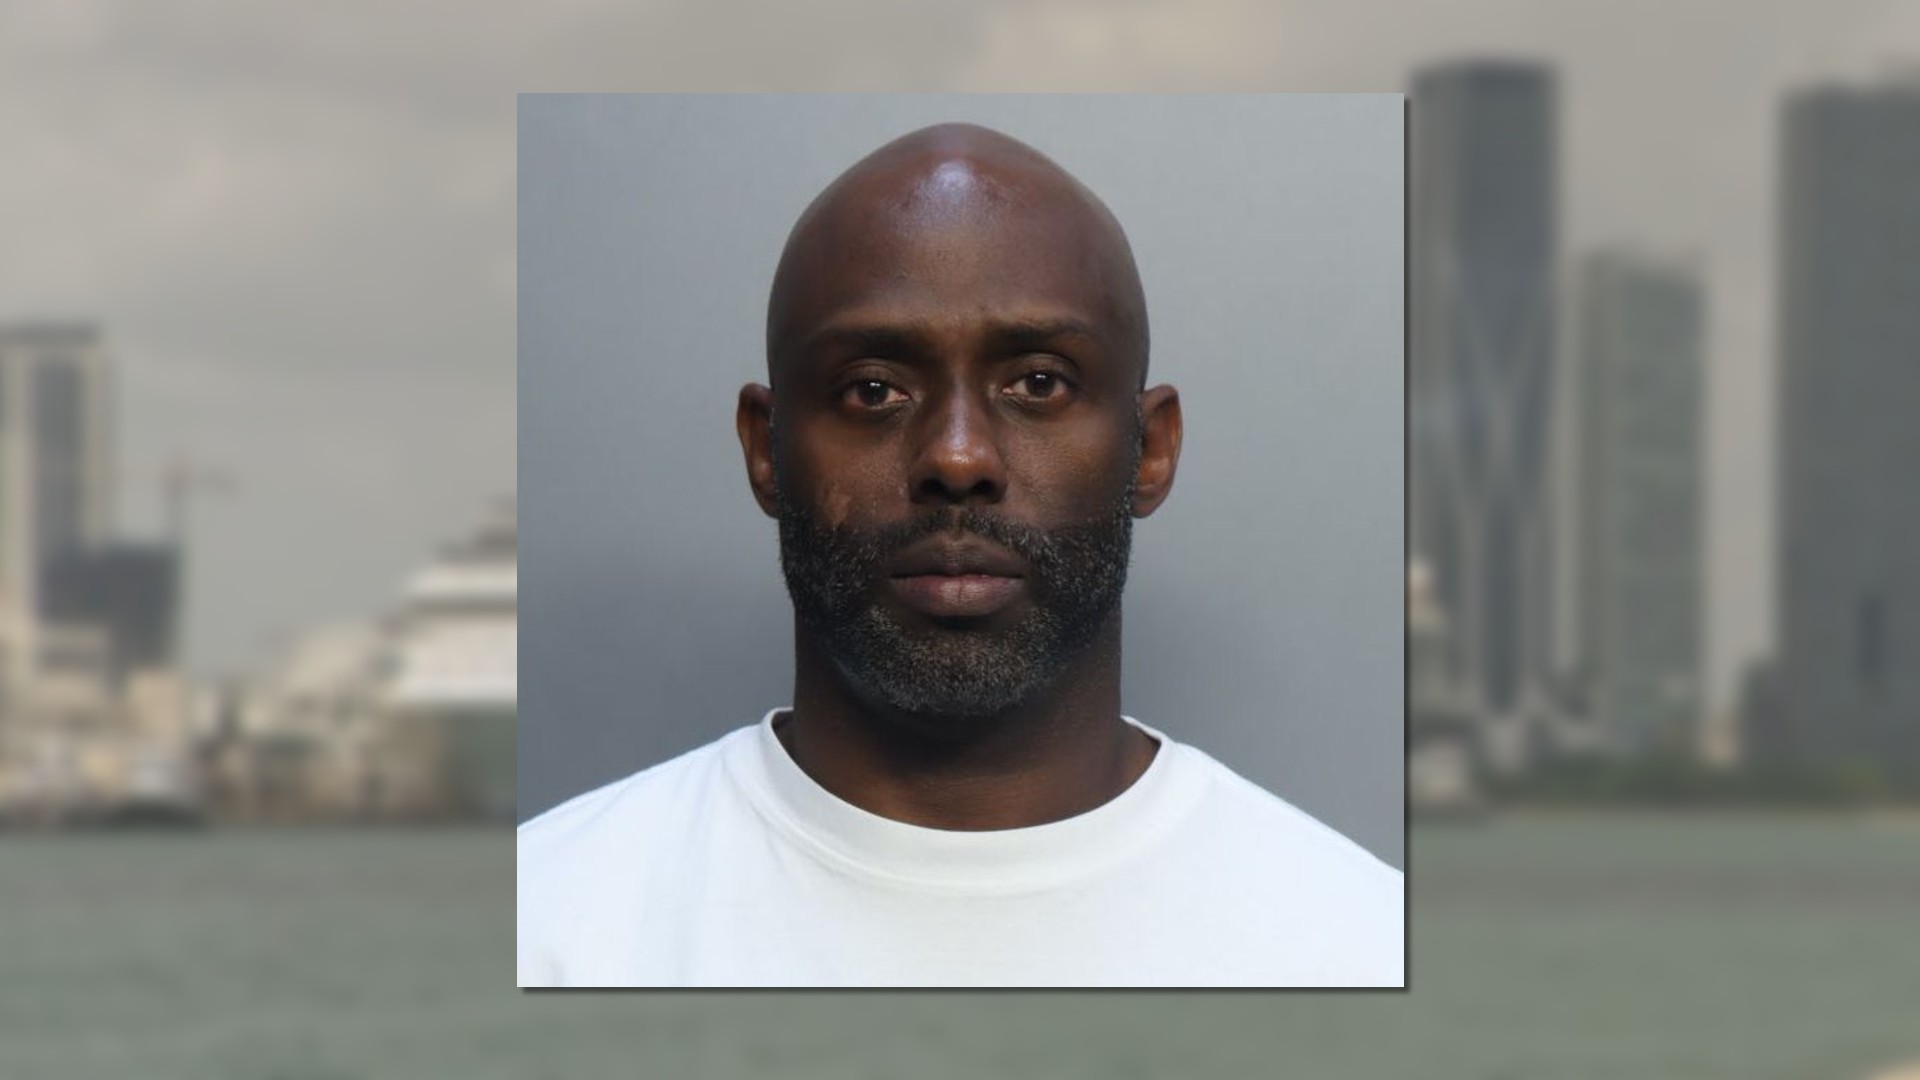 Atlanta man gets off cruise in Miami, gets caught with child sex abuse  clips, police say